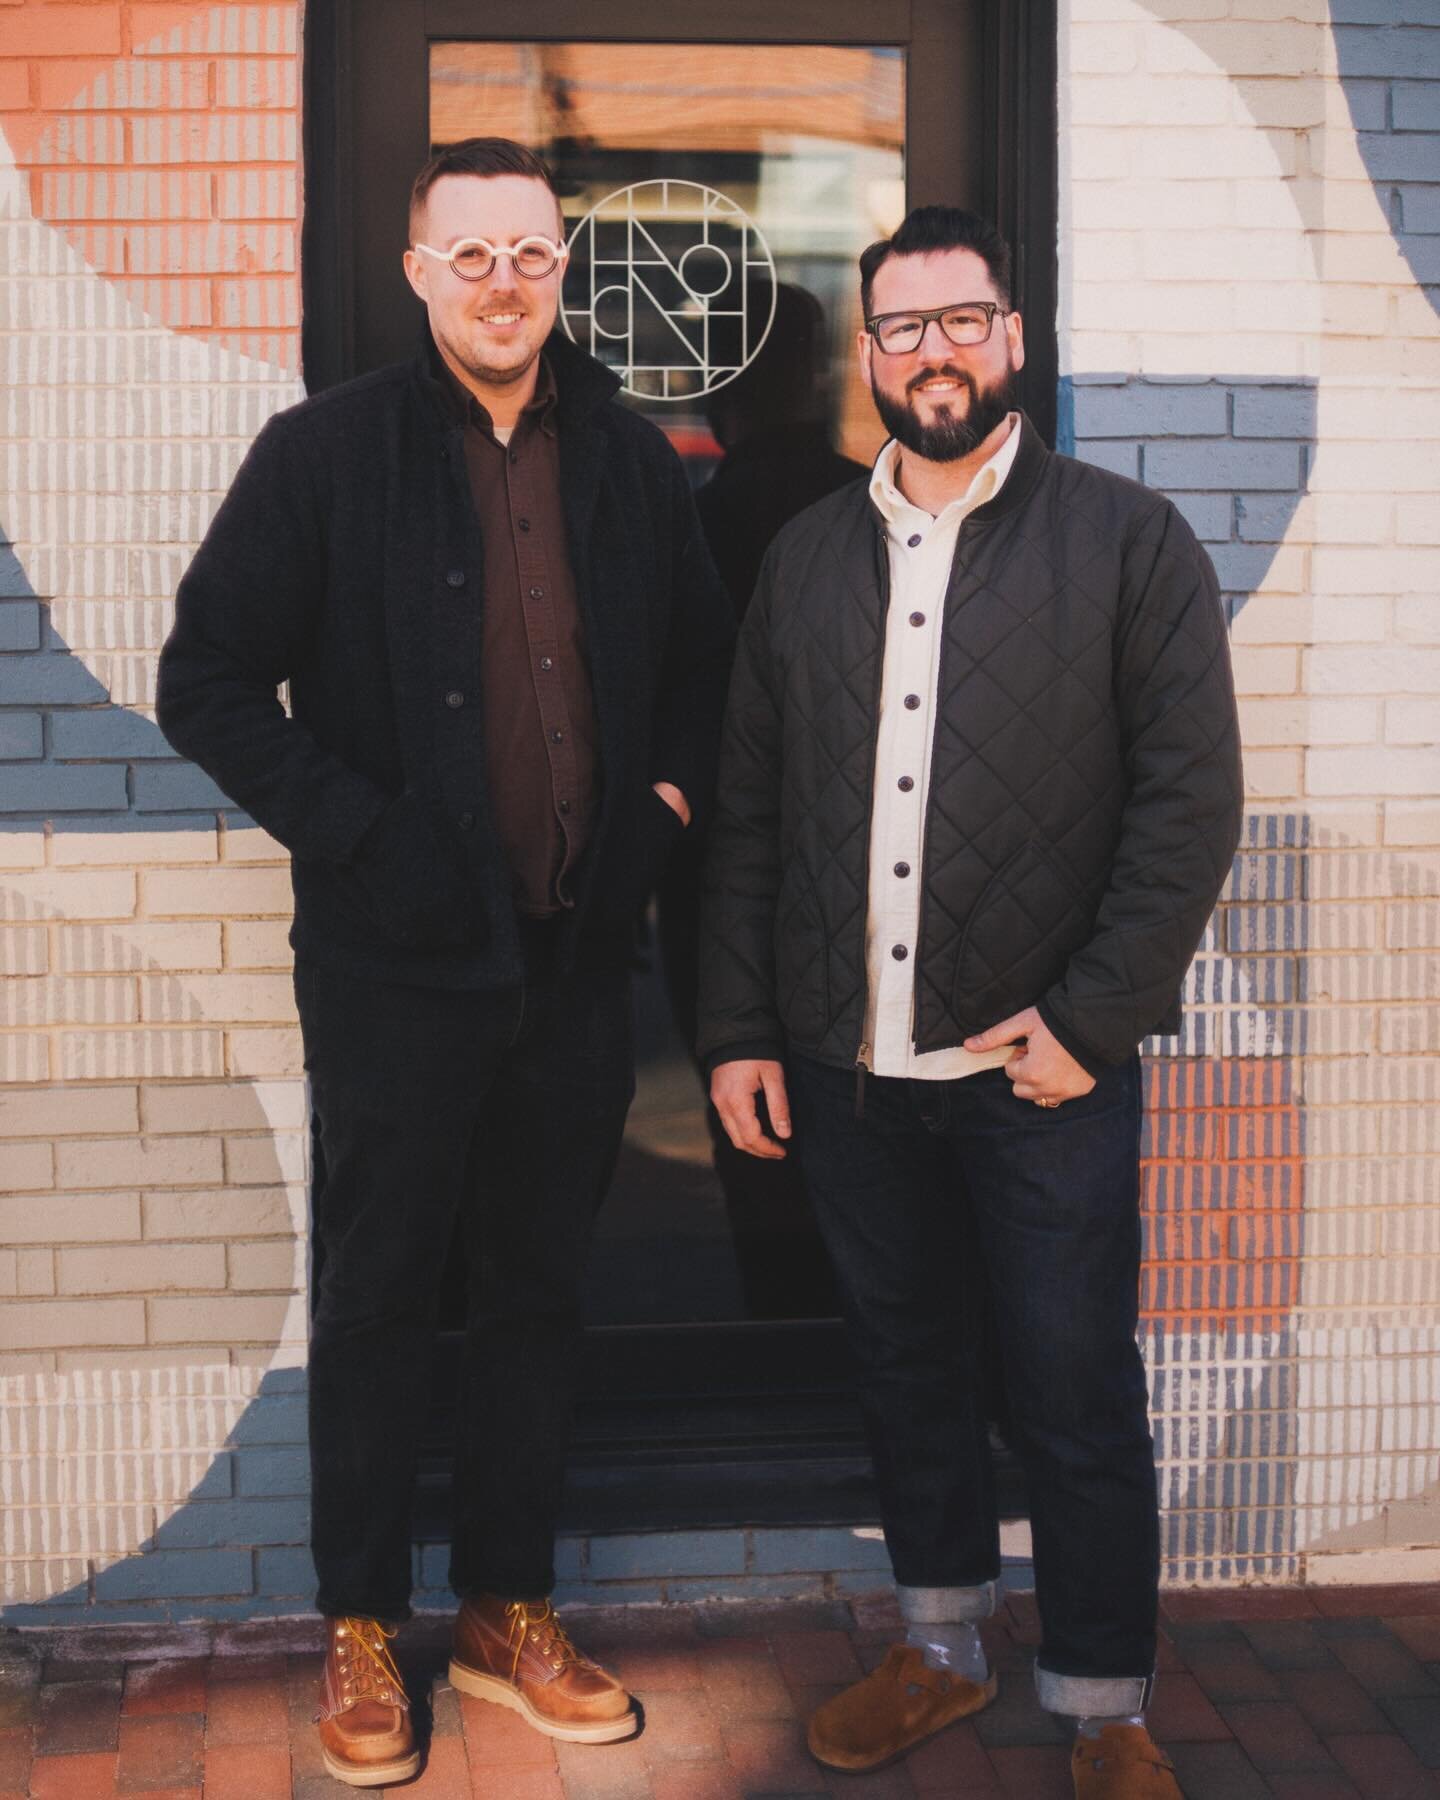 Felt cute, might delete later ☺️

We did a little website refresh and wanted to give a big shout out to Joel @peekuh for making the store (and us) look so fresh 📸
.
.
.
.
.
.
.
#northoptical #seeyousoon #portlandmaine #portland #maine #visitportland